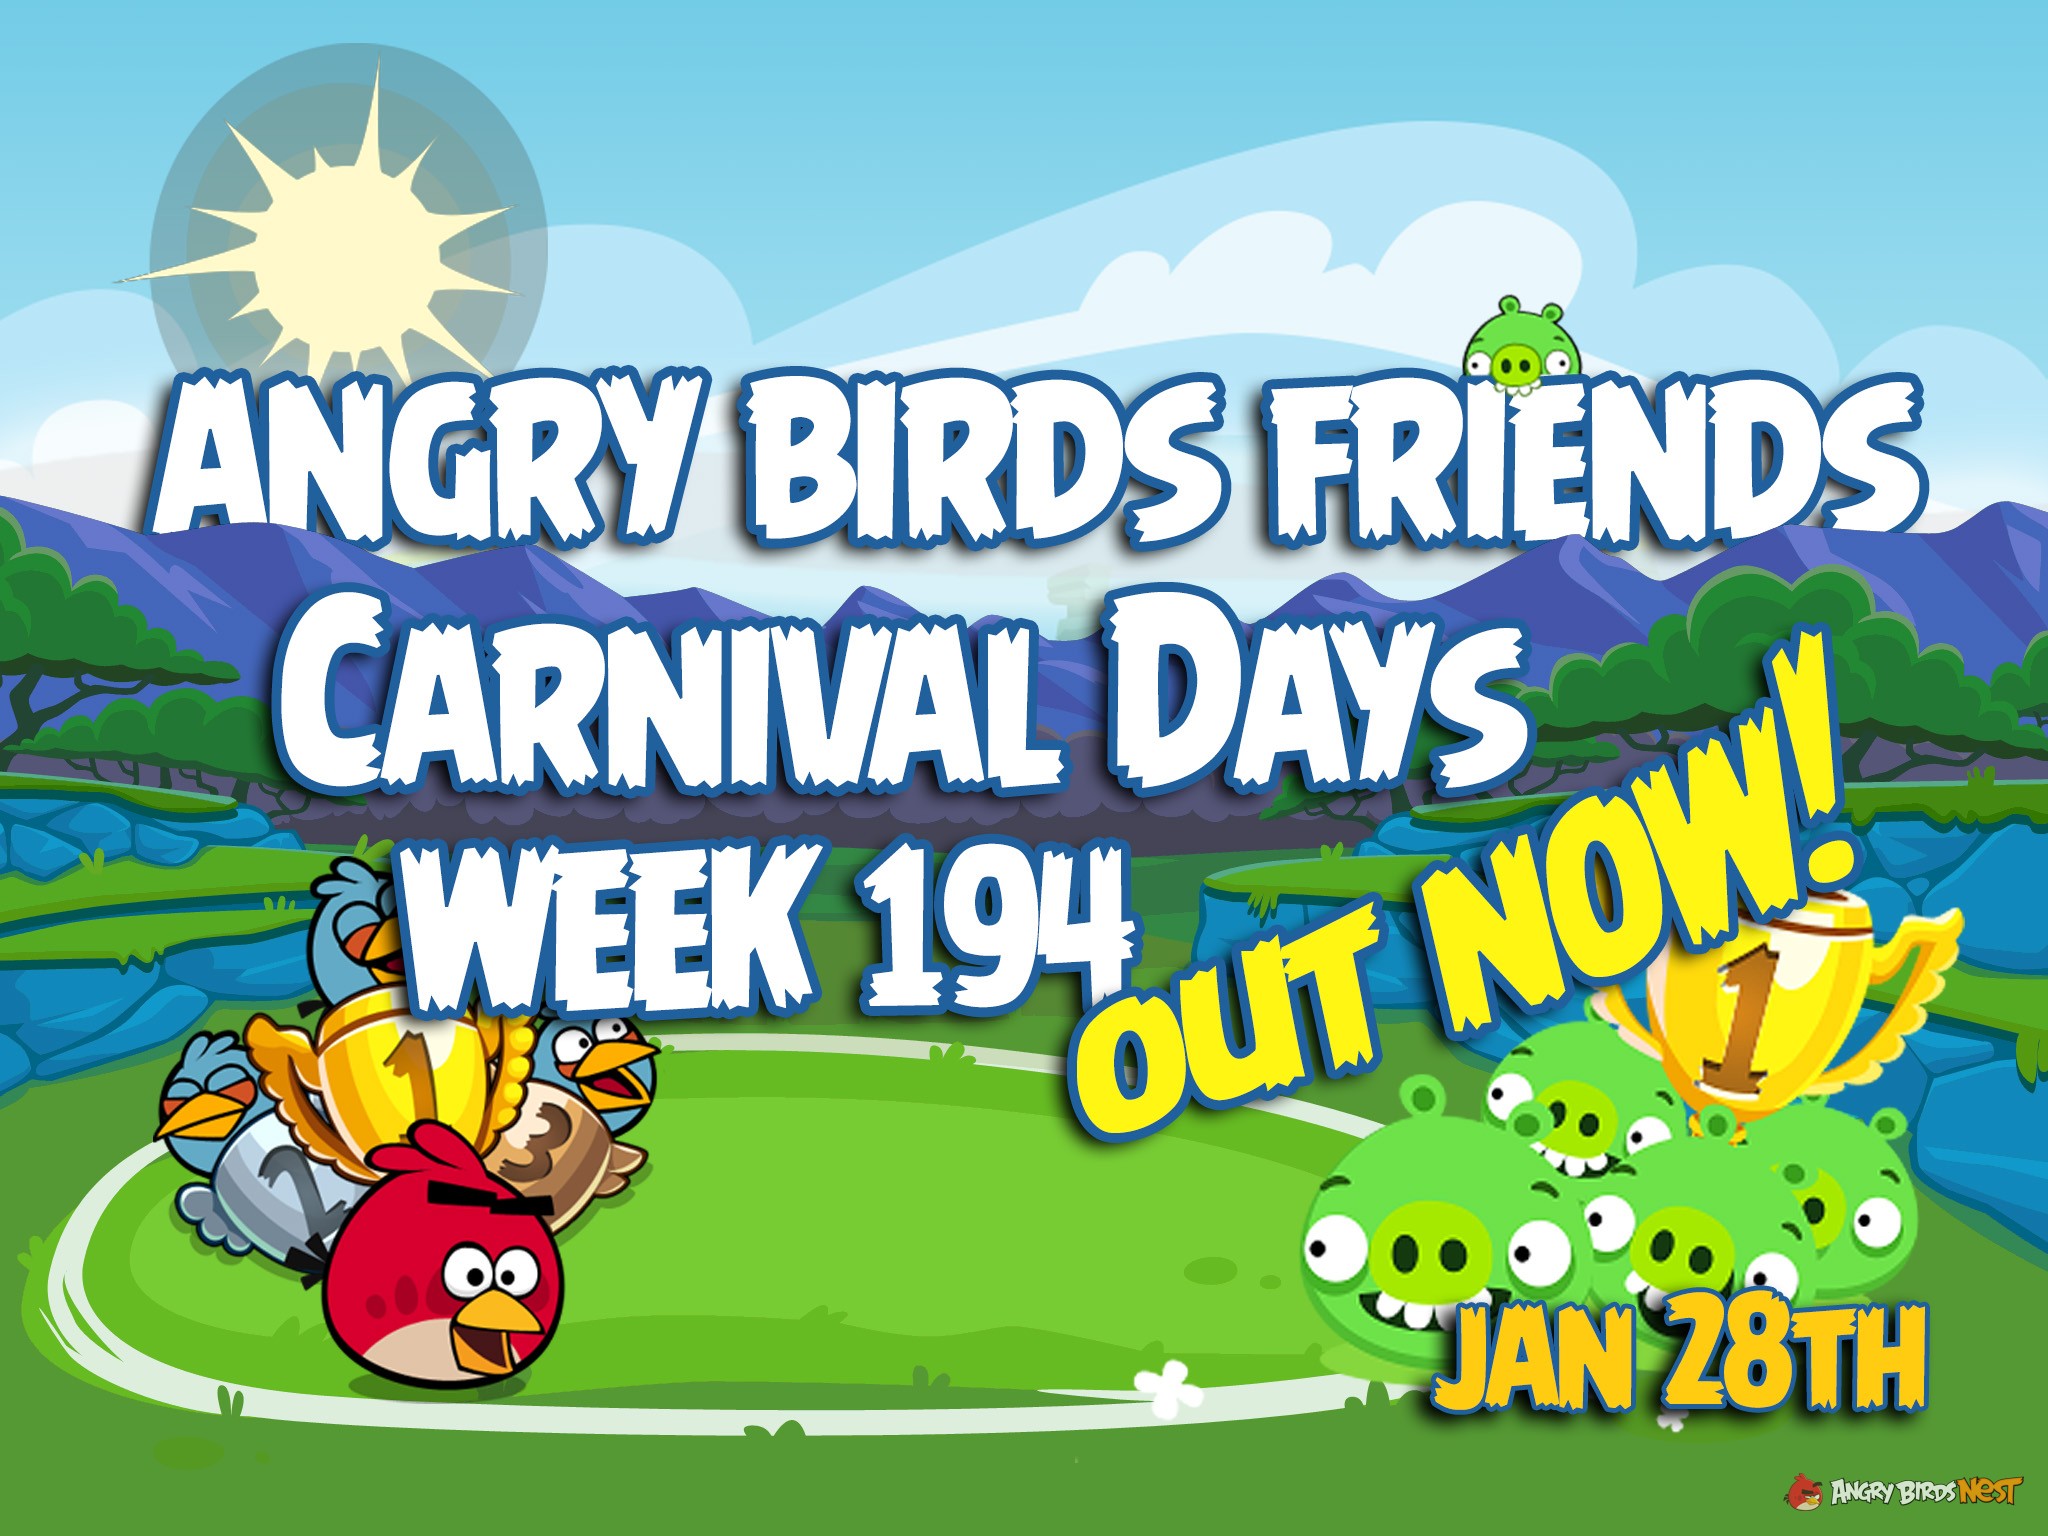 Angry Birds Friends Tournament Week 194 Feature Image